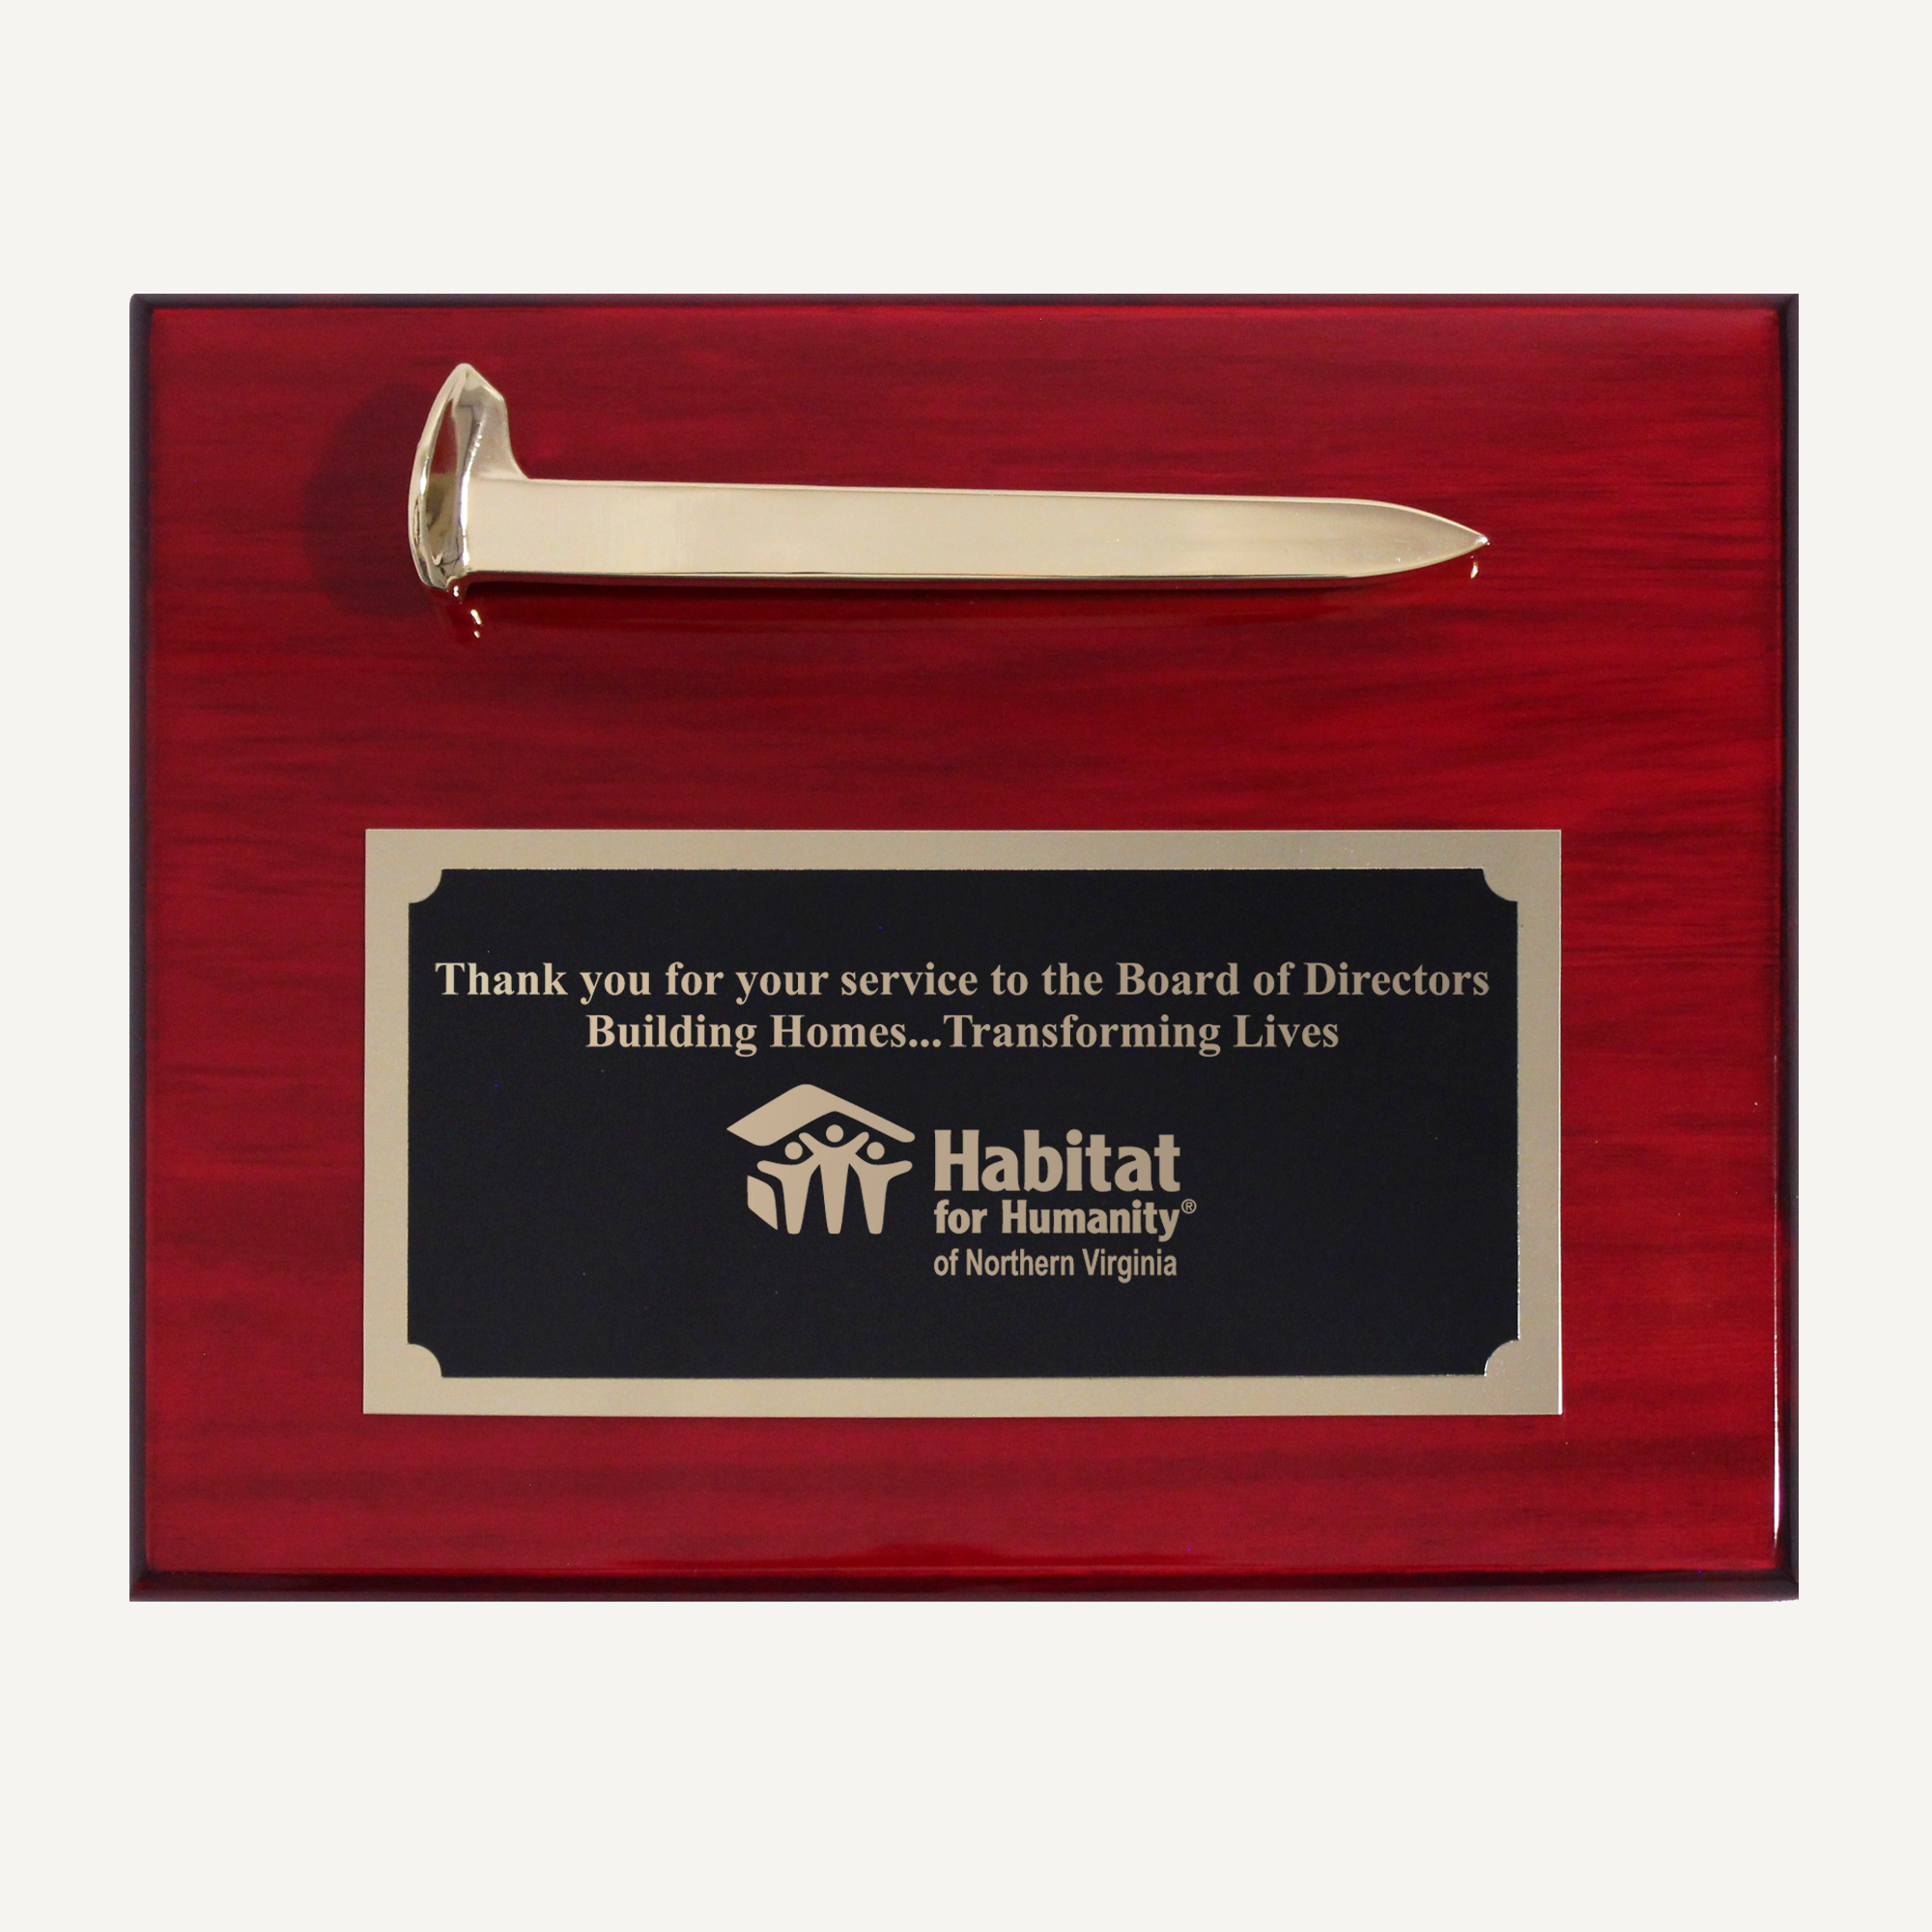 Gold Plated Ceremonial Railroad Spikes Plaques - Engraving, Awards & Gifts